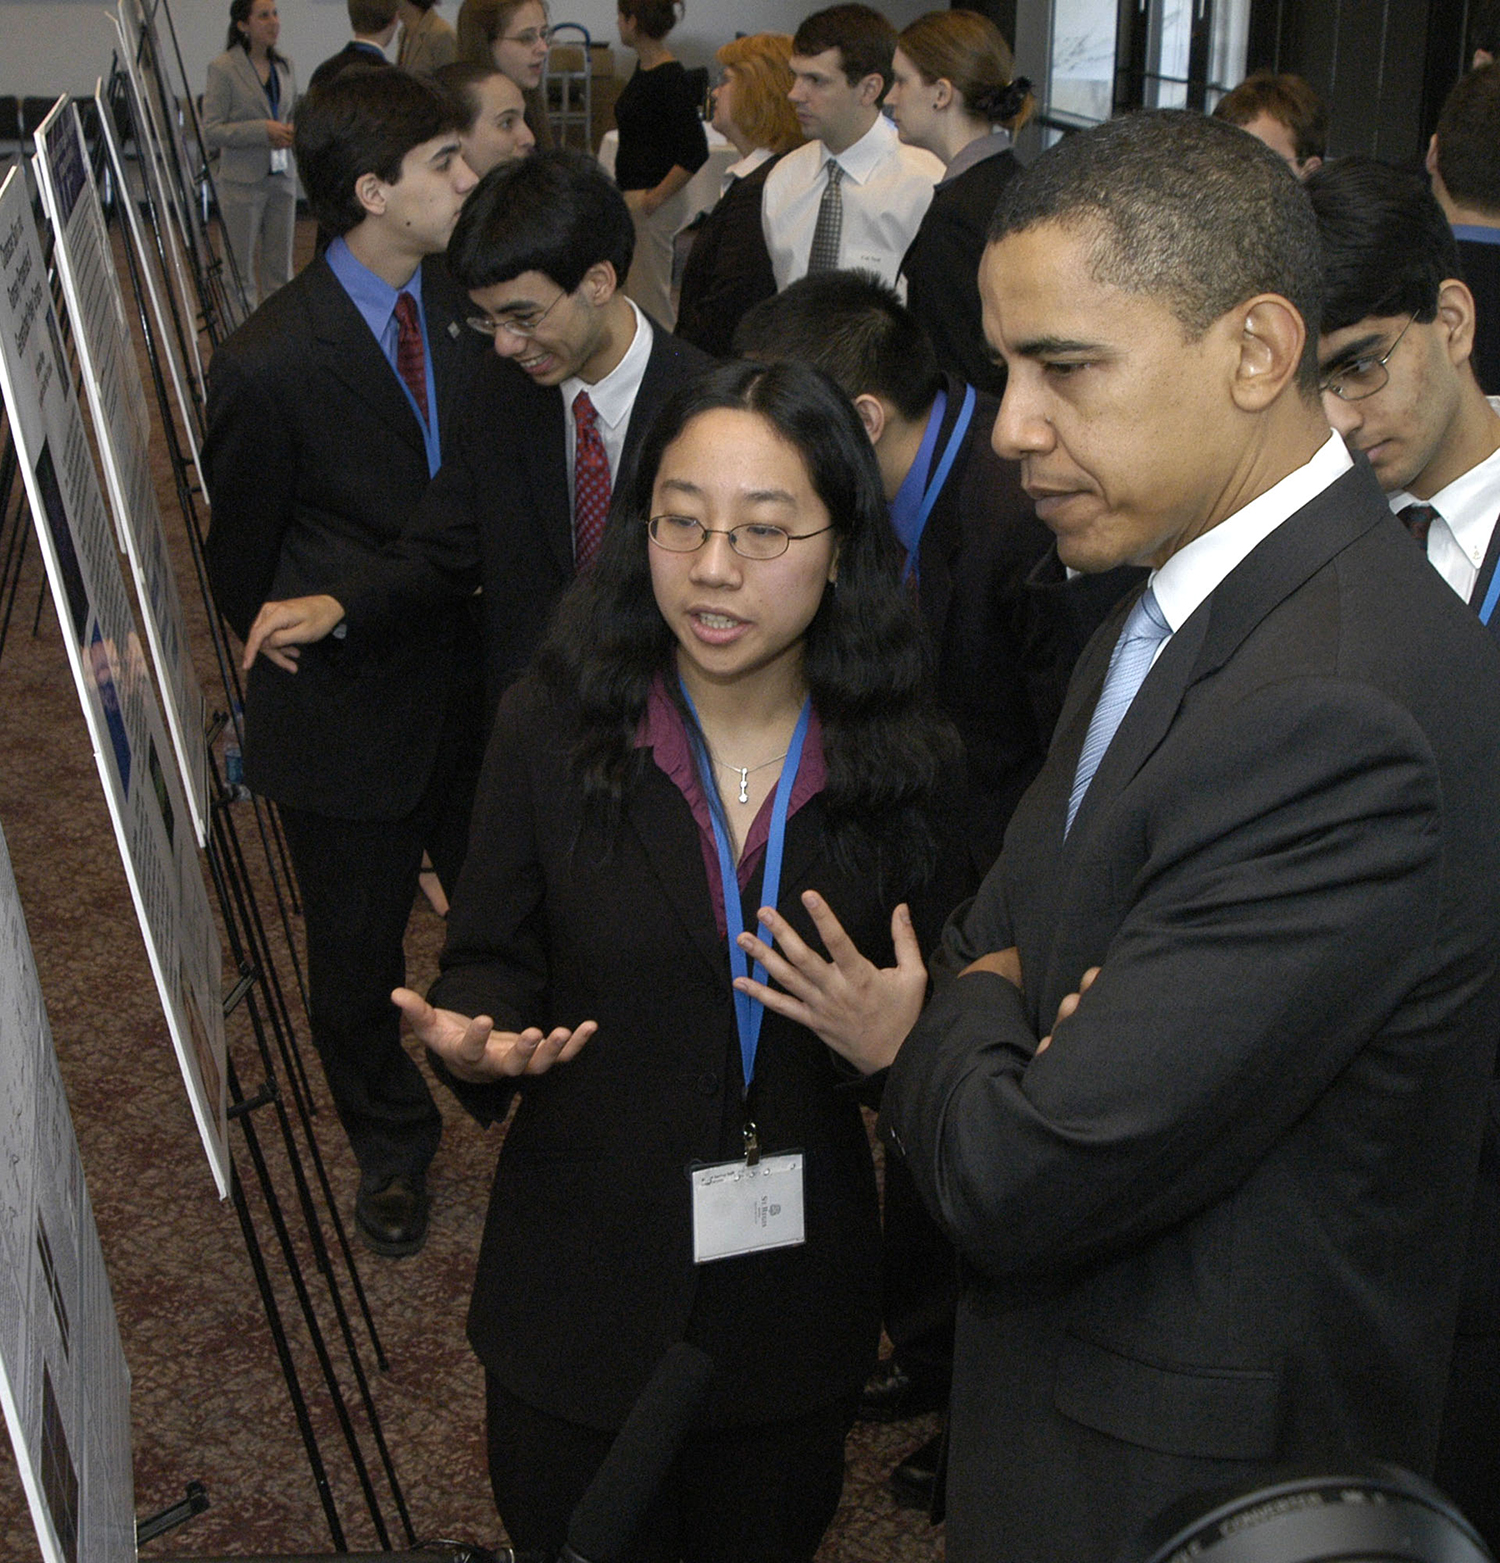 Cindy Wang discusses her project with Senator Obama